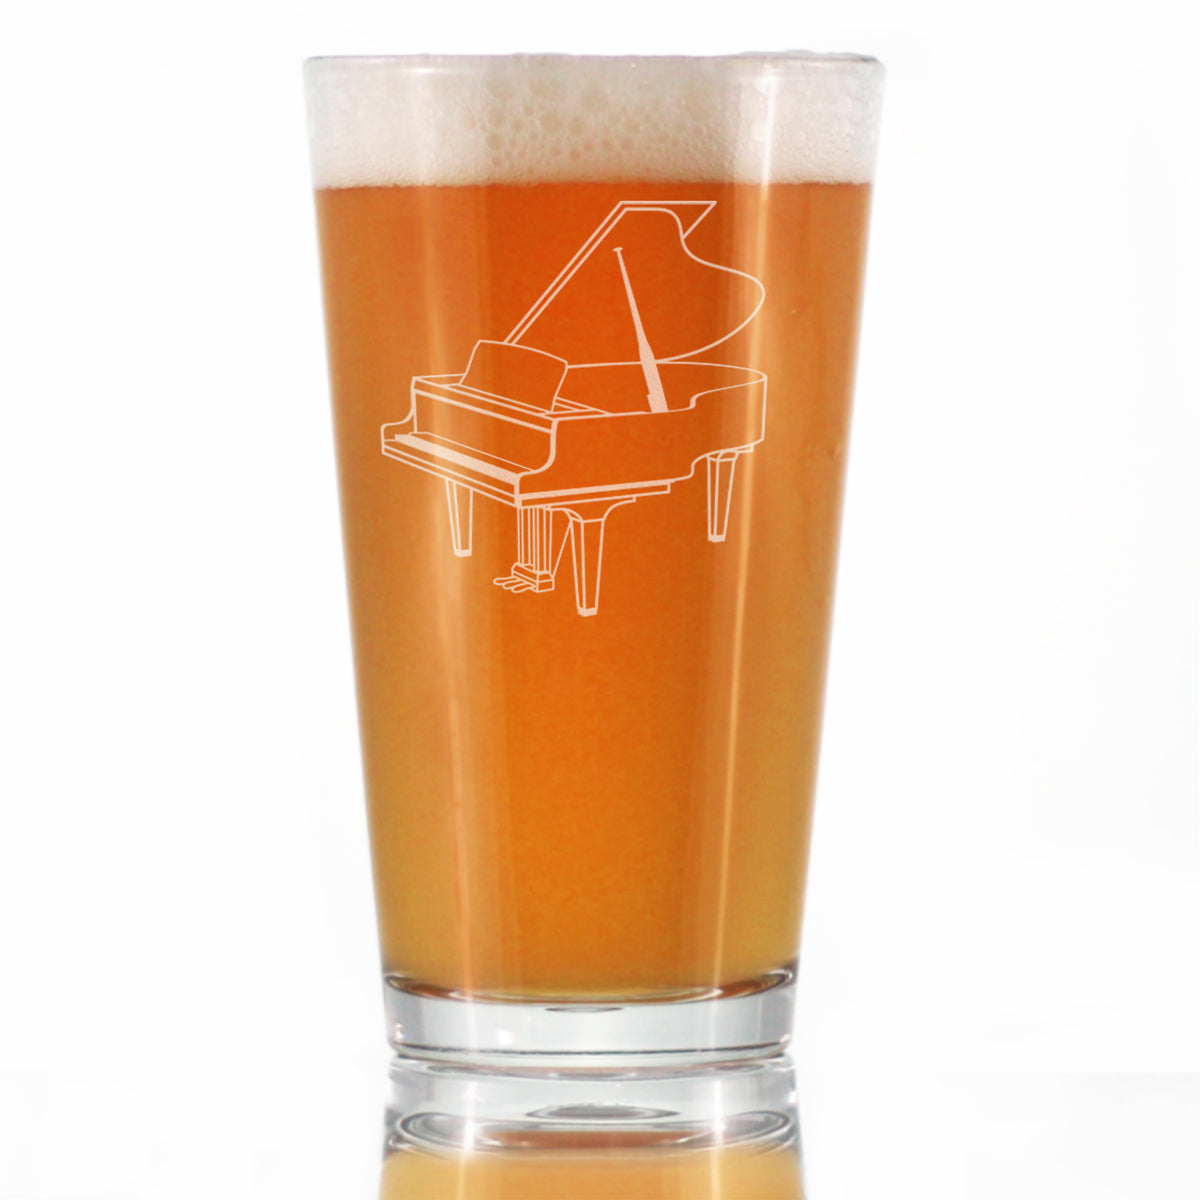 Grand Piano Pint Glass for Beer - Music Gifts for Piano Players, Teachers and Musical Accessories for Musicians that Play Keys - 16 Oz Glasses